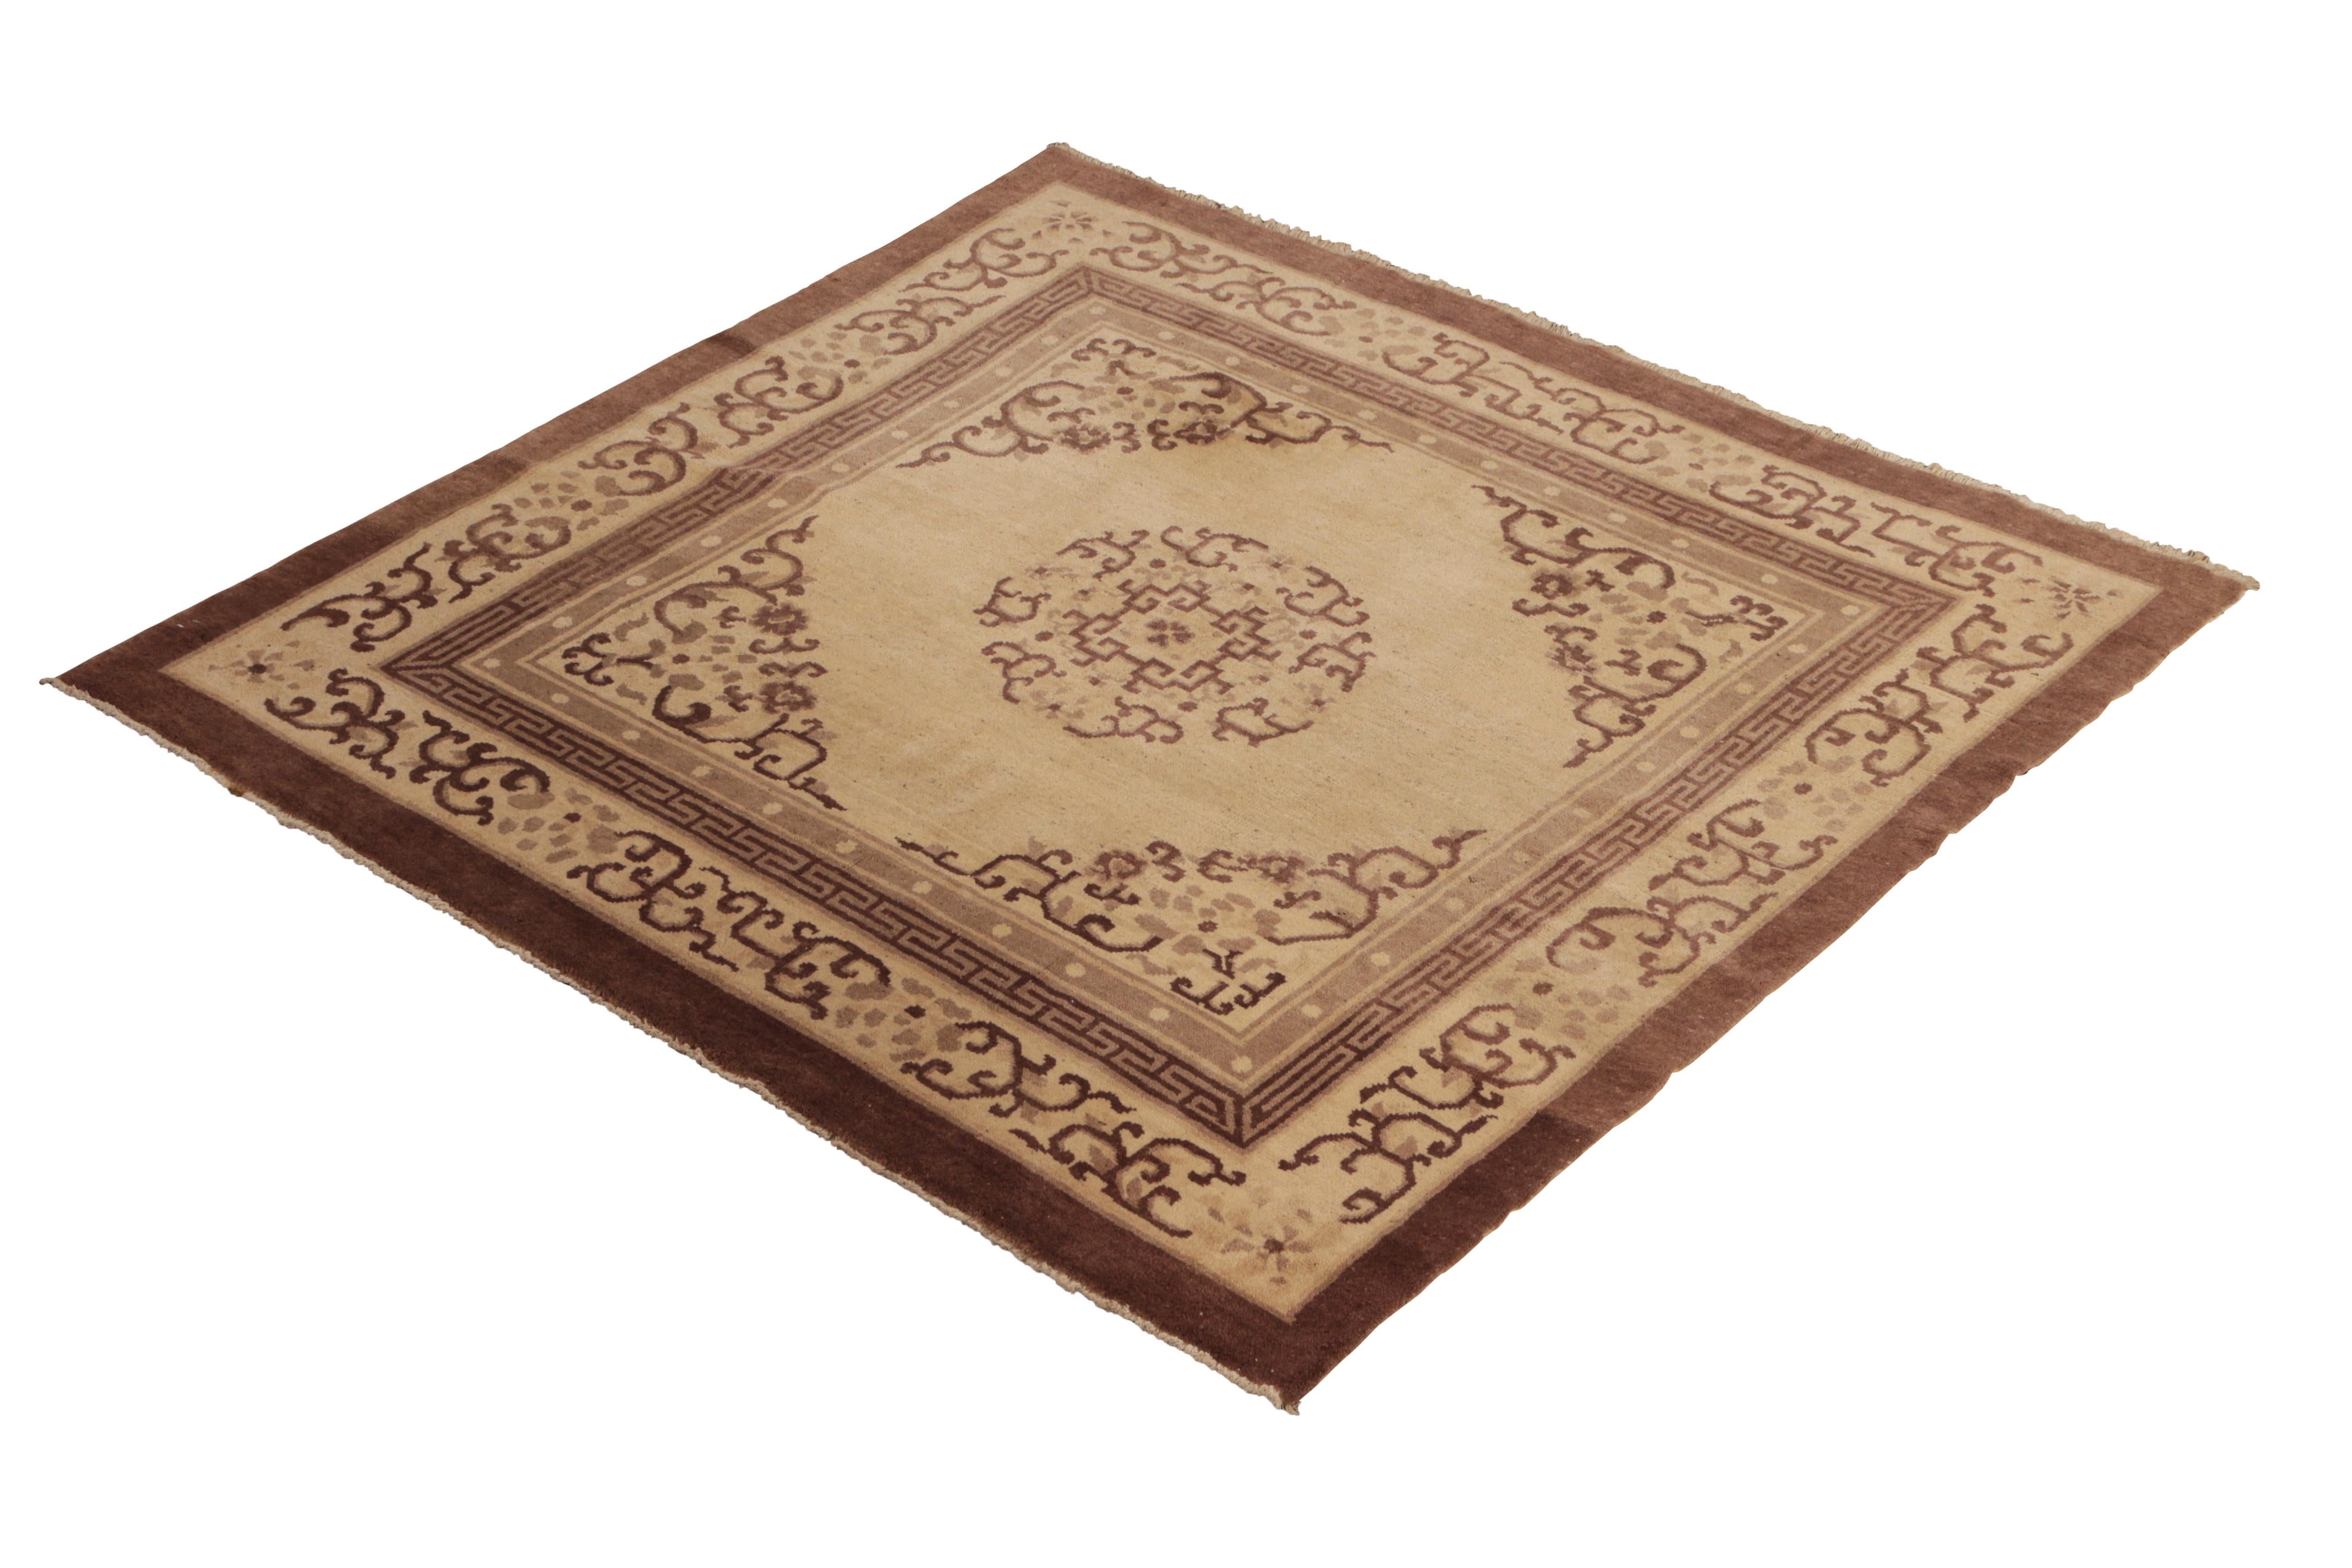 Hand knotted in wool originating from China, circa 1920, this antique rug connotes a Peking Art Deco design in a rich traditional pallet of beige and brown colorways, with subtle notes of taupe gray gracefully drawing the eye to the refinement of